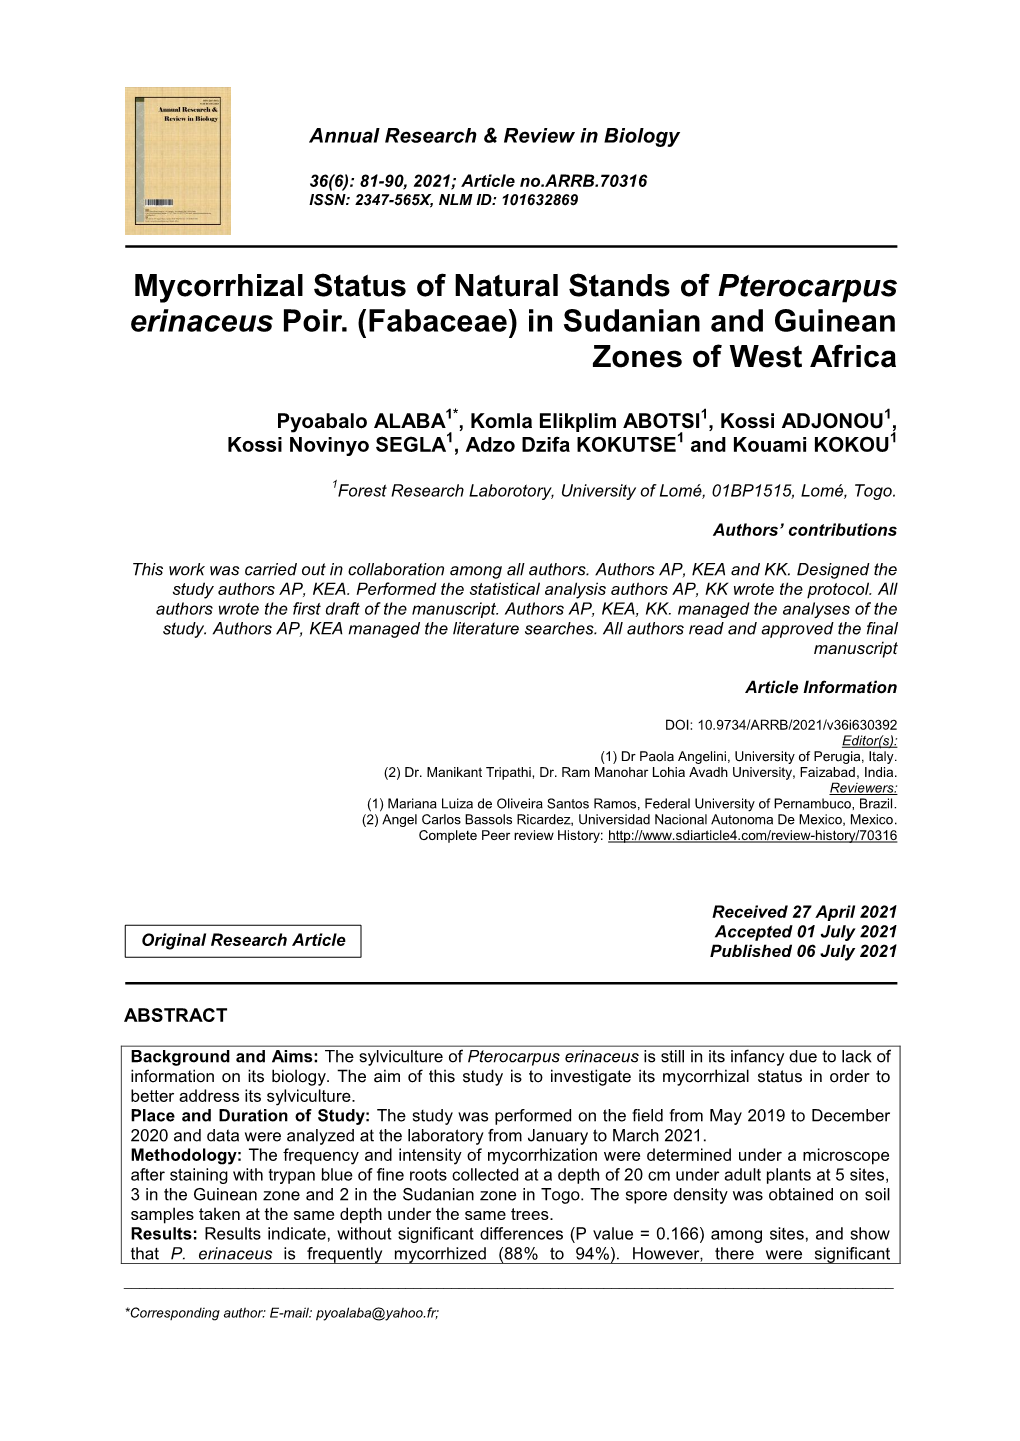 Mycorrhizal Status of Natural Stands of Pterocarpus Erinaceus Poir. (Fabaceae) in Sudanian and Guinean Zones of West Africa